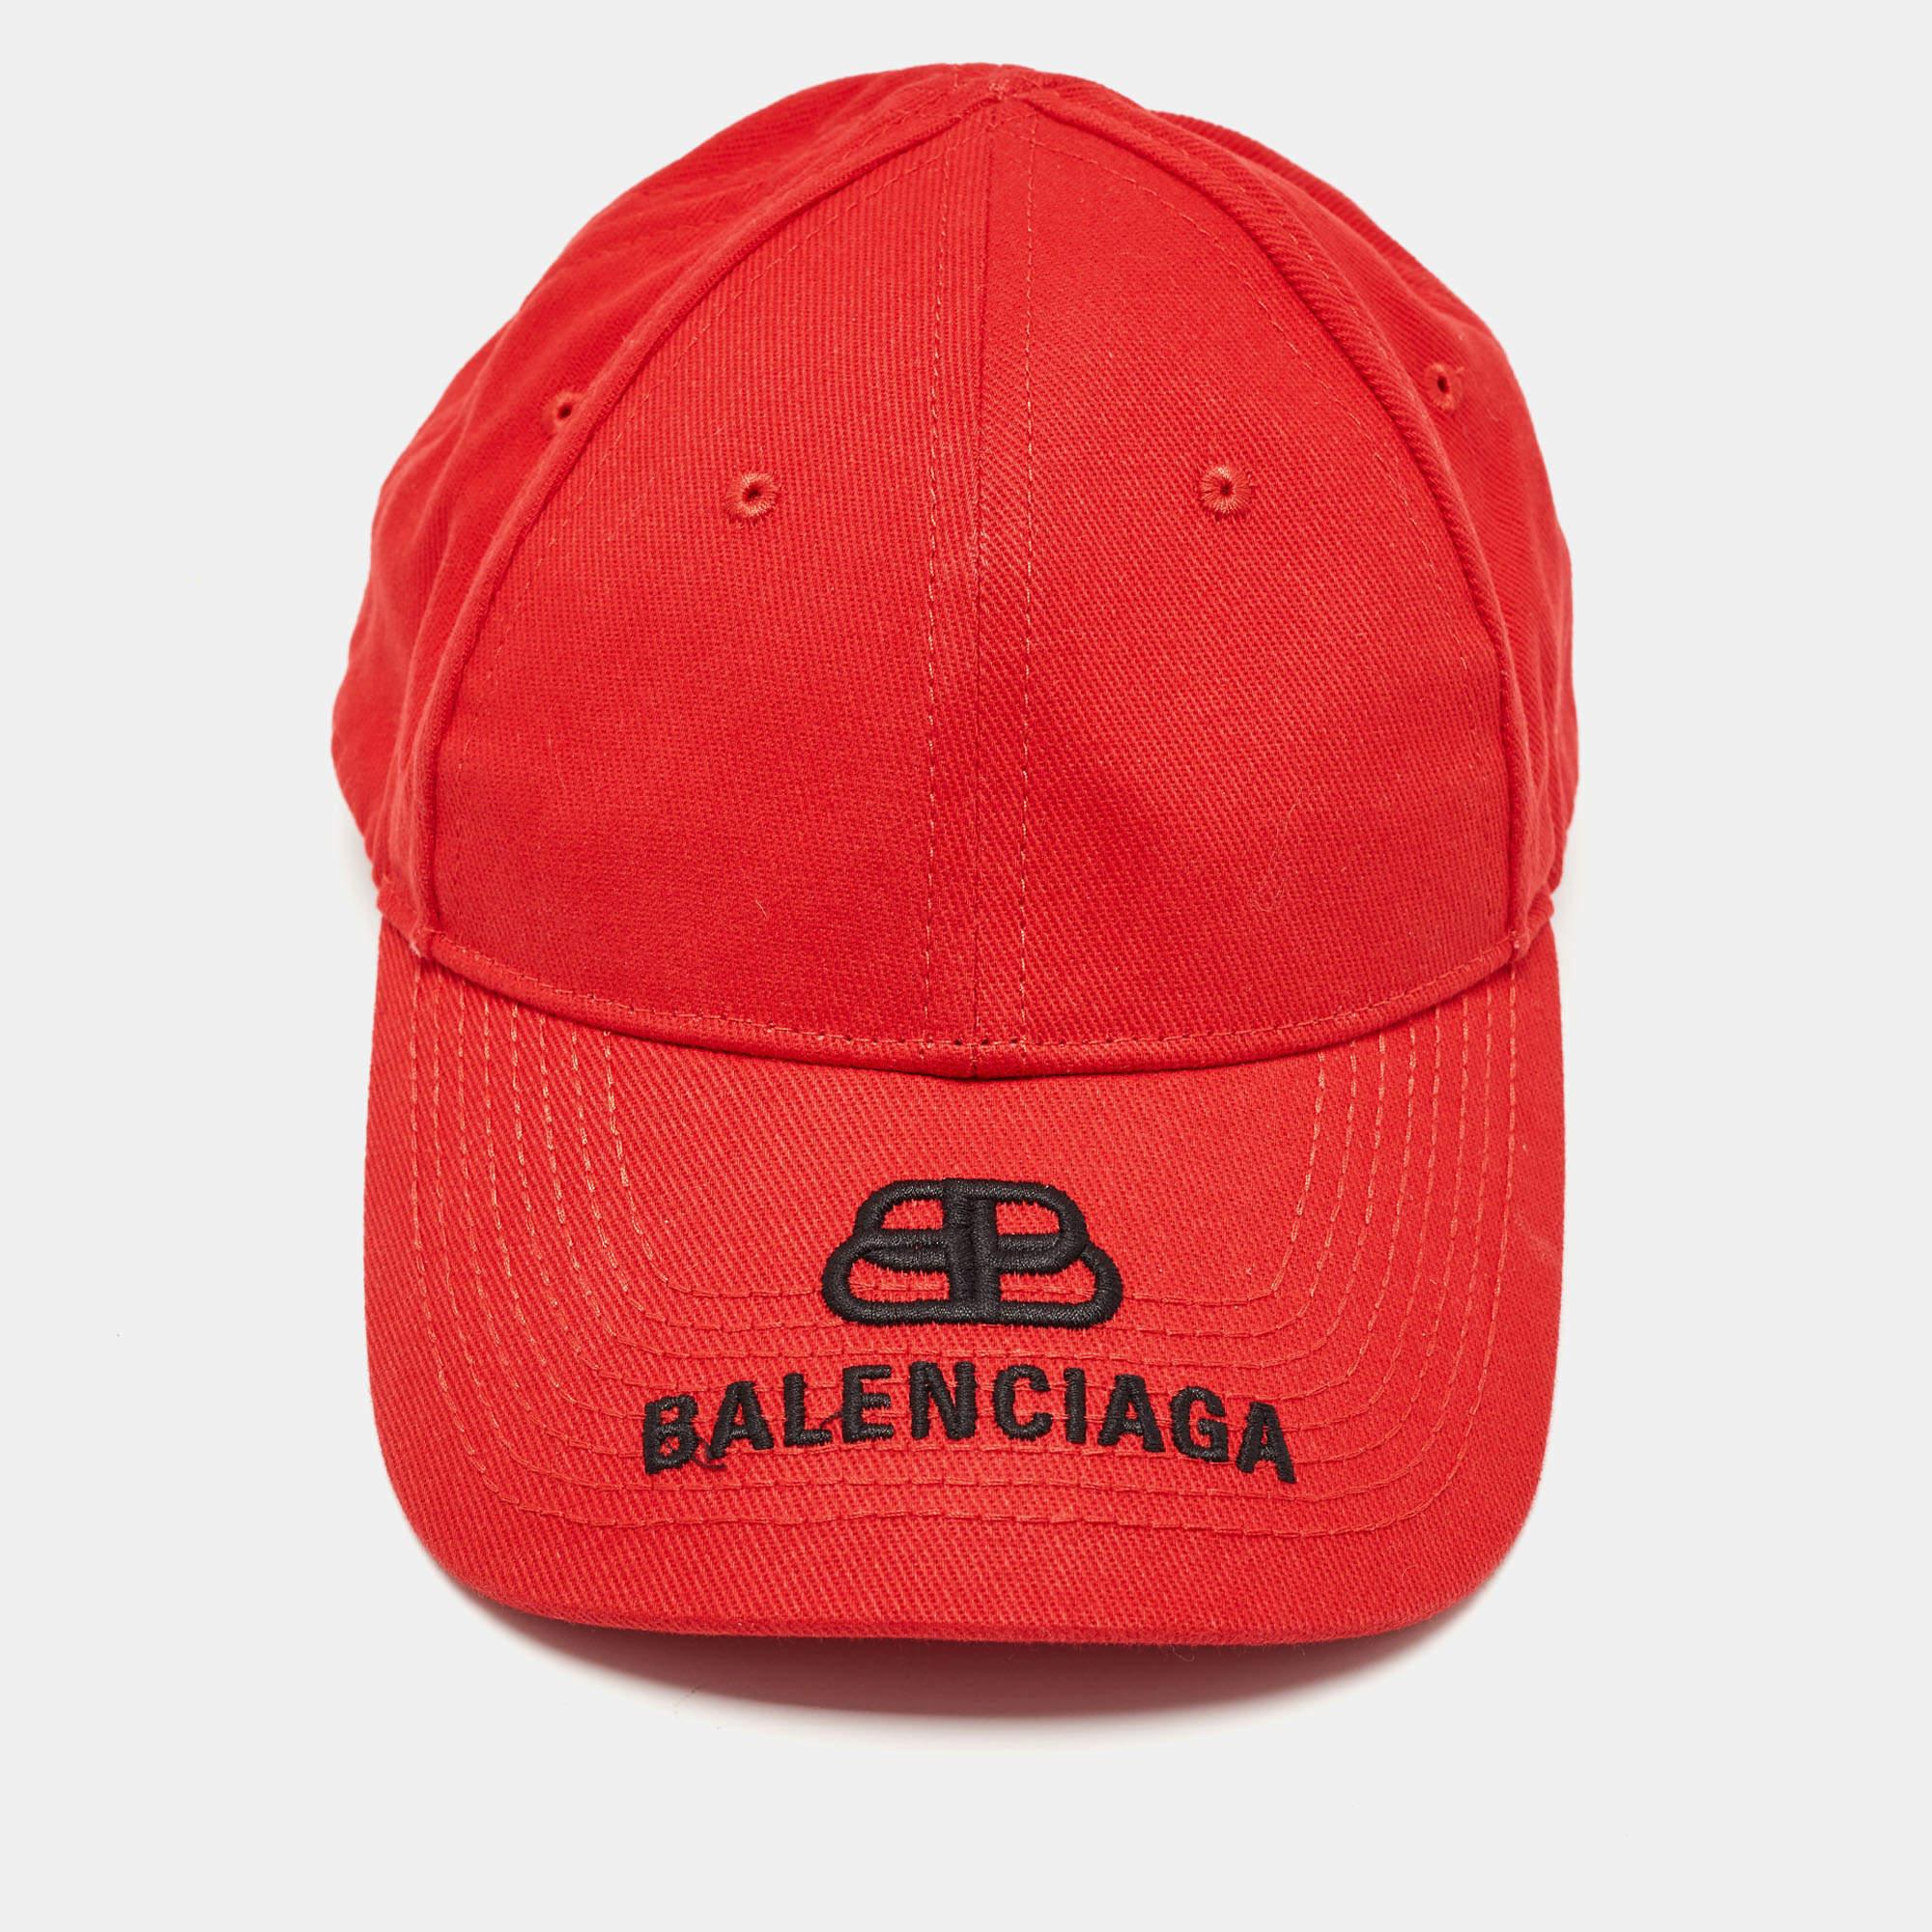 Caps are an ideal style statement with casual outfits. This Balenciaga piece is made from quality materials and features signature elements. This piece will be a smart addition to your cap collection.

Includes: Price Tag, Original Dustbag

